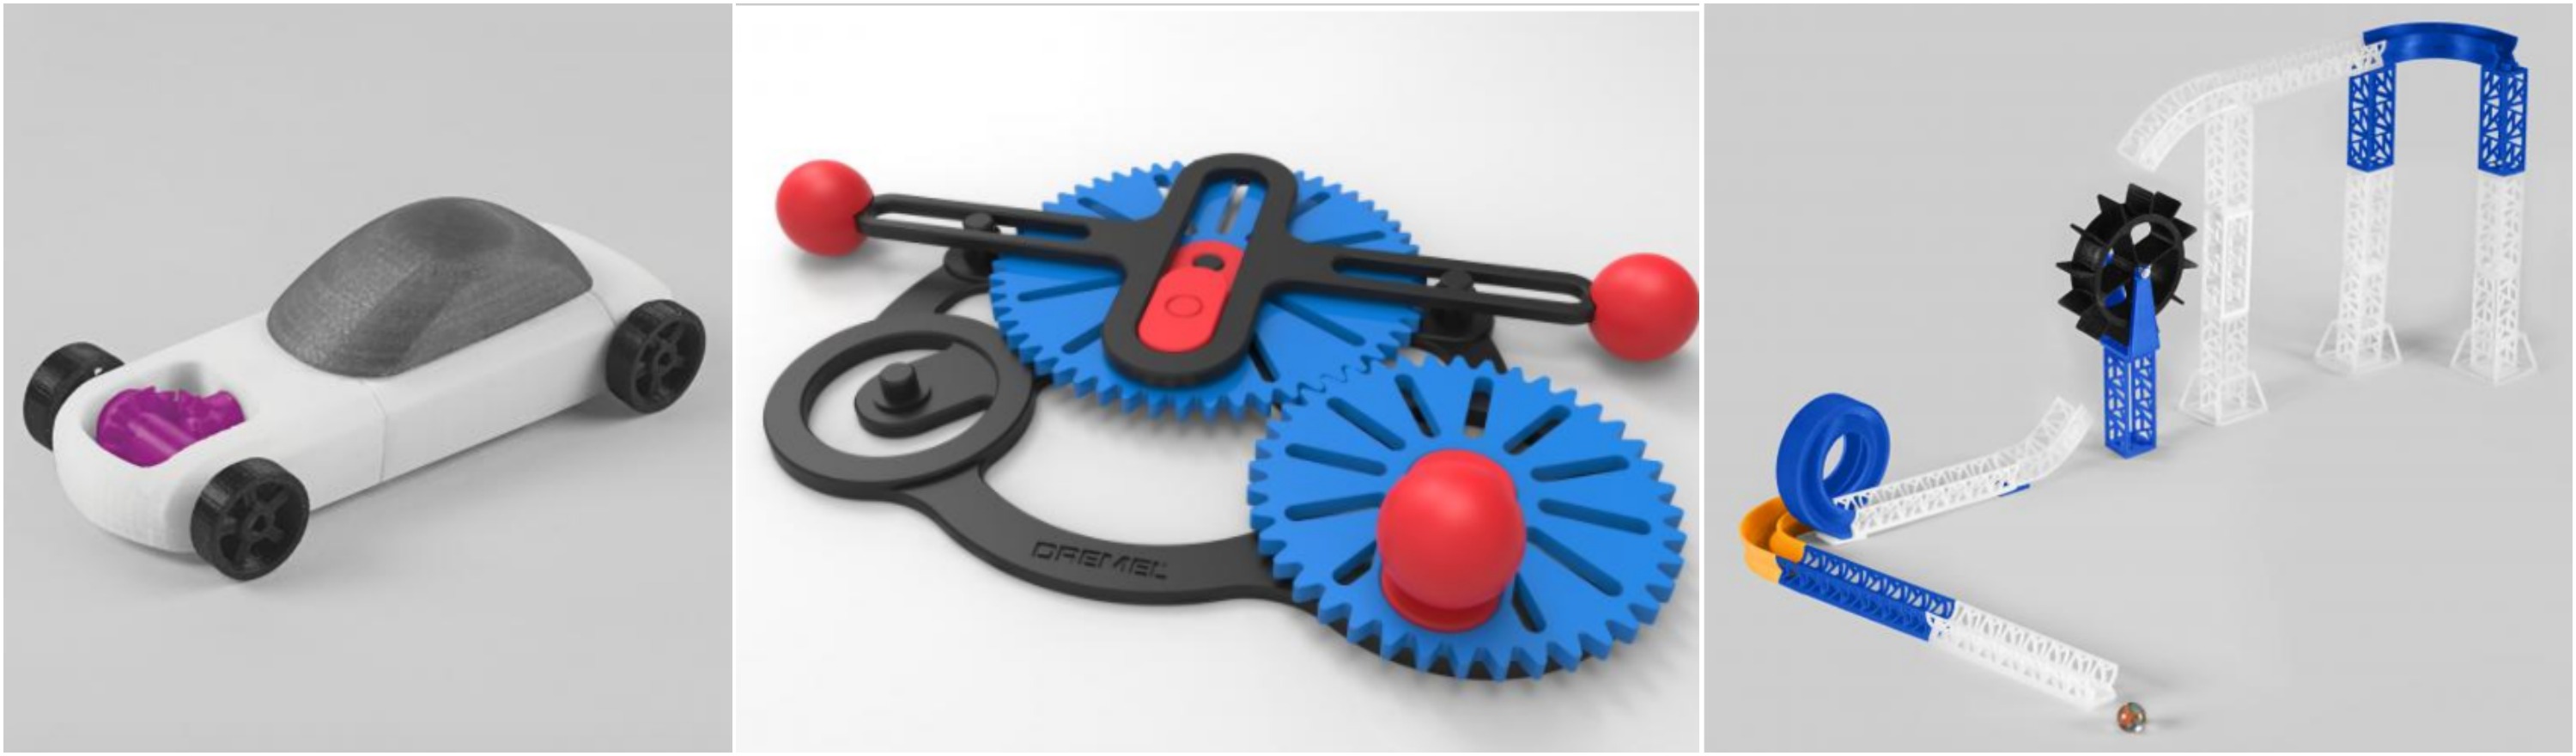 STEM & Physics 3D Printing Models for the Classroom